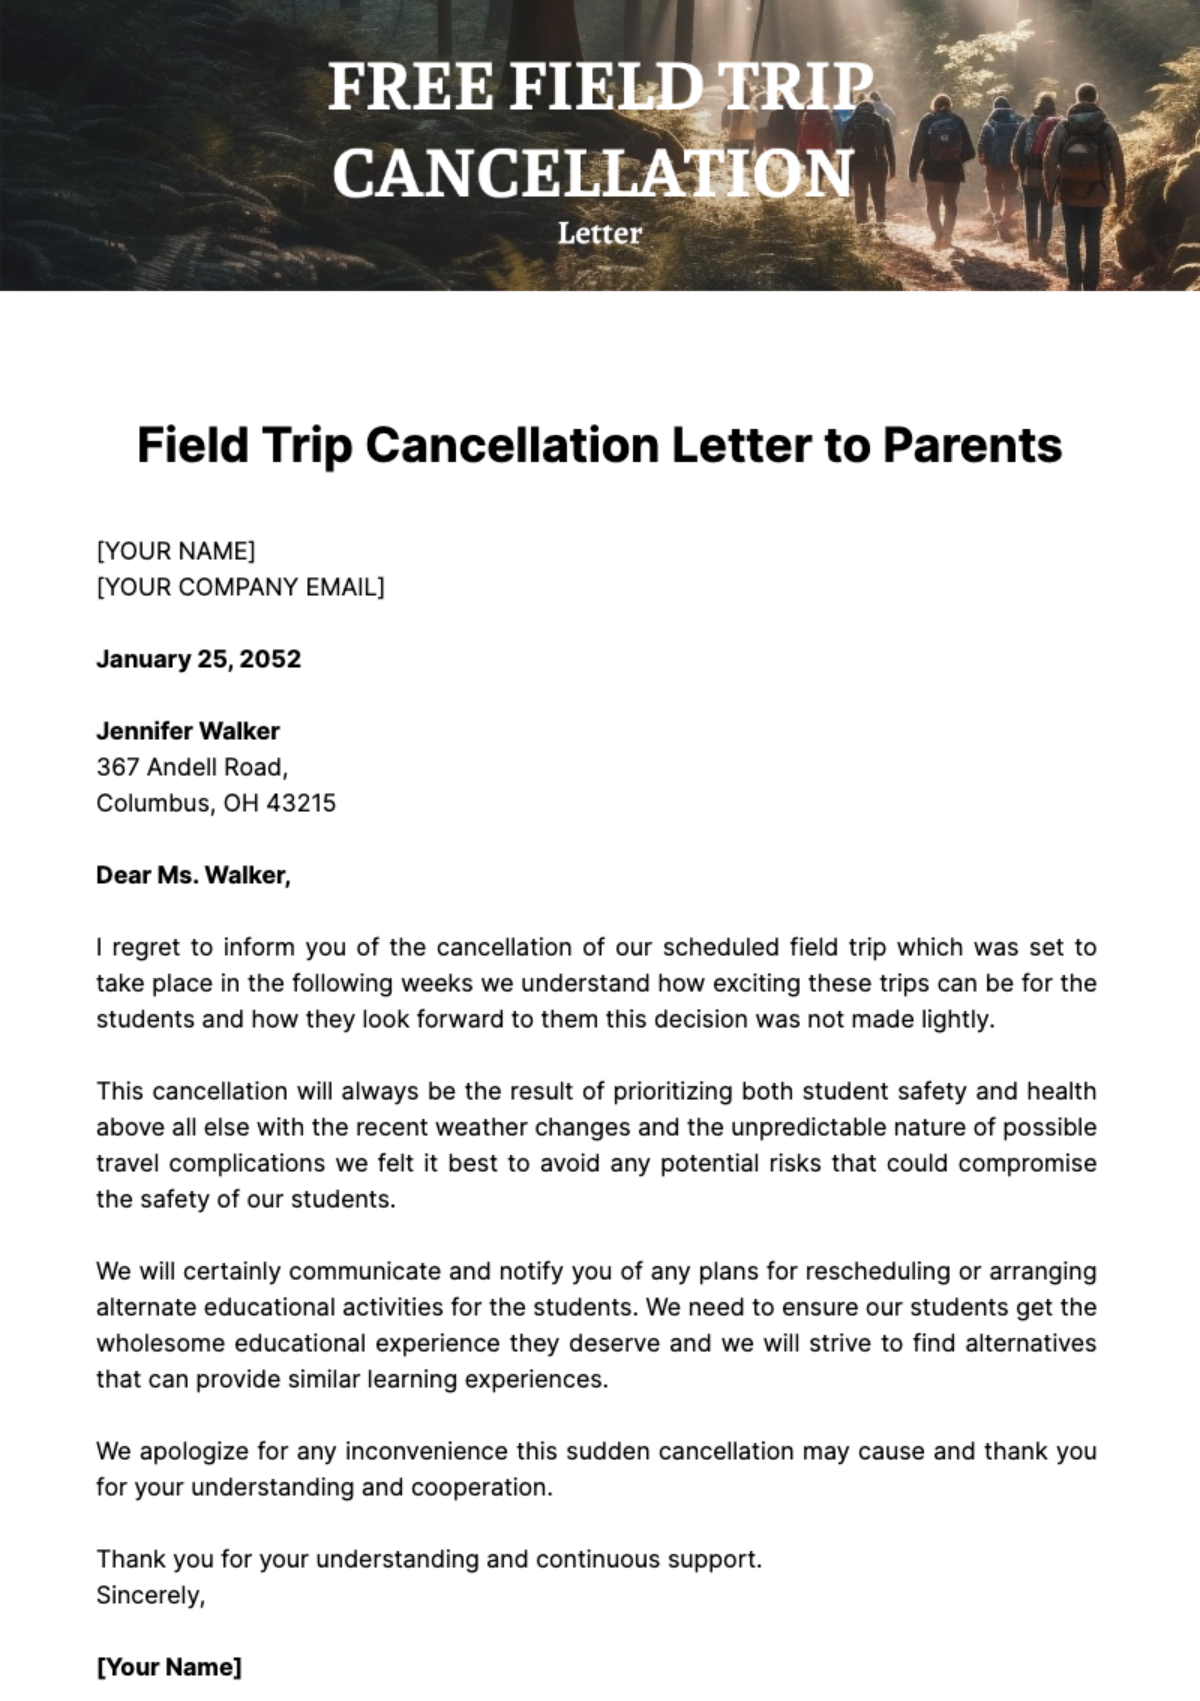 Free Field Trip Cancellation Letter to Parents Template